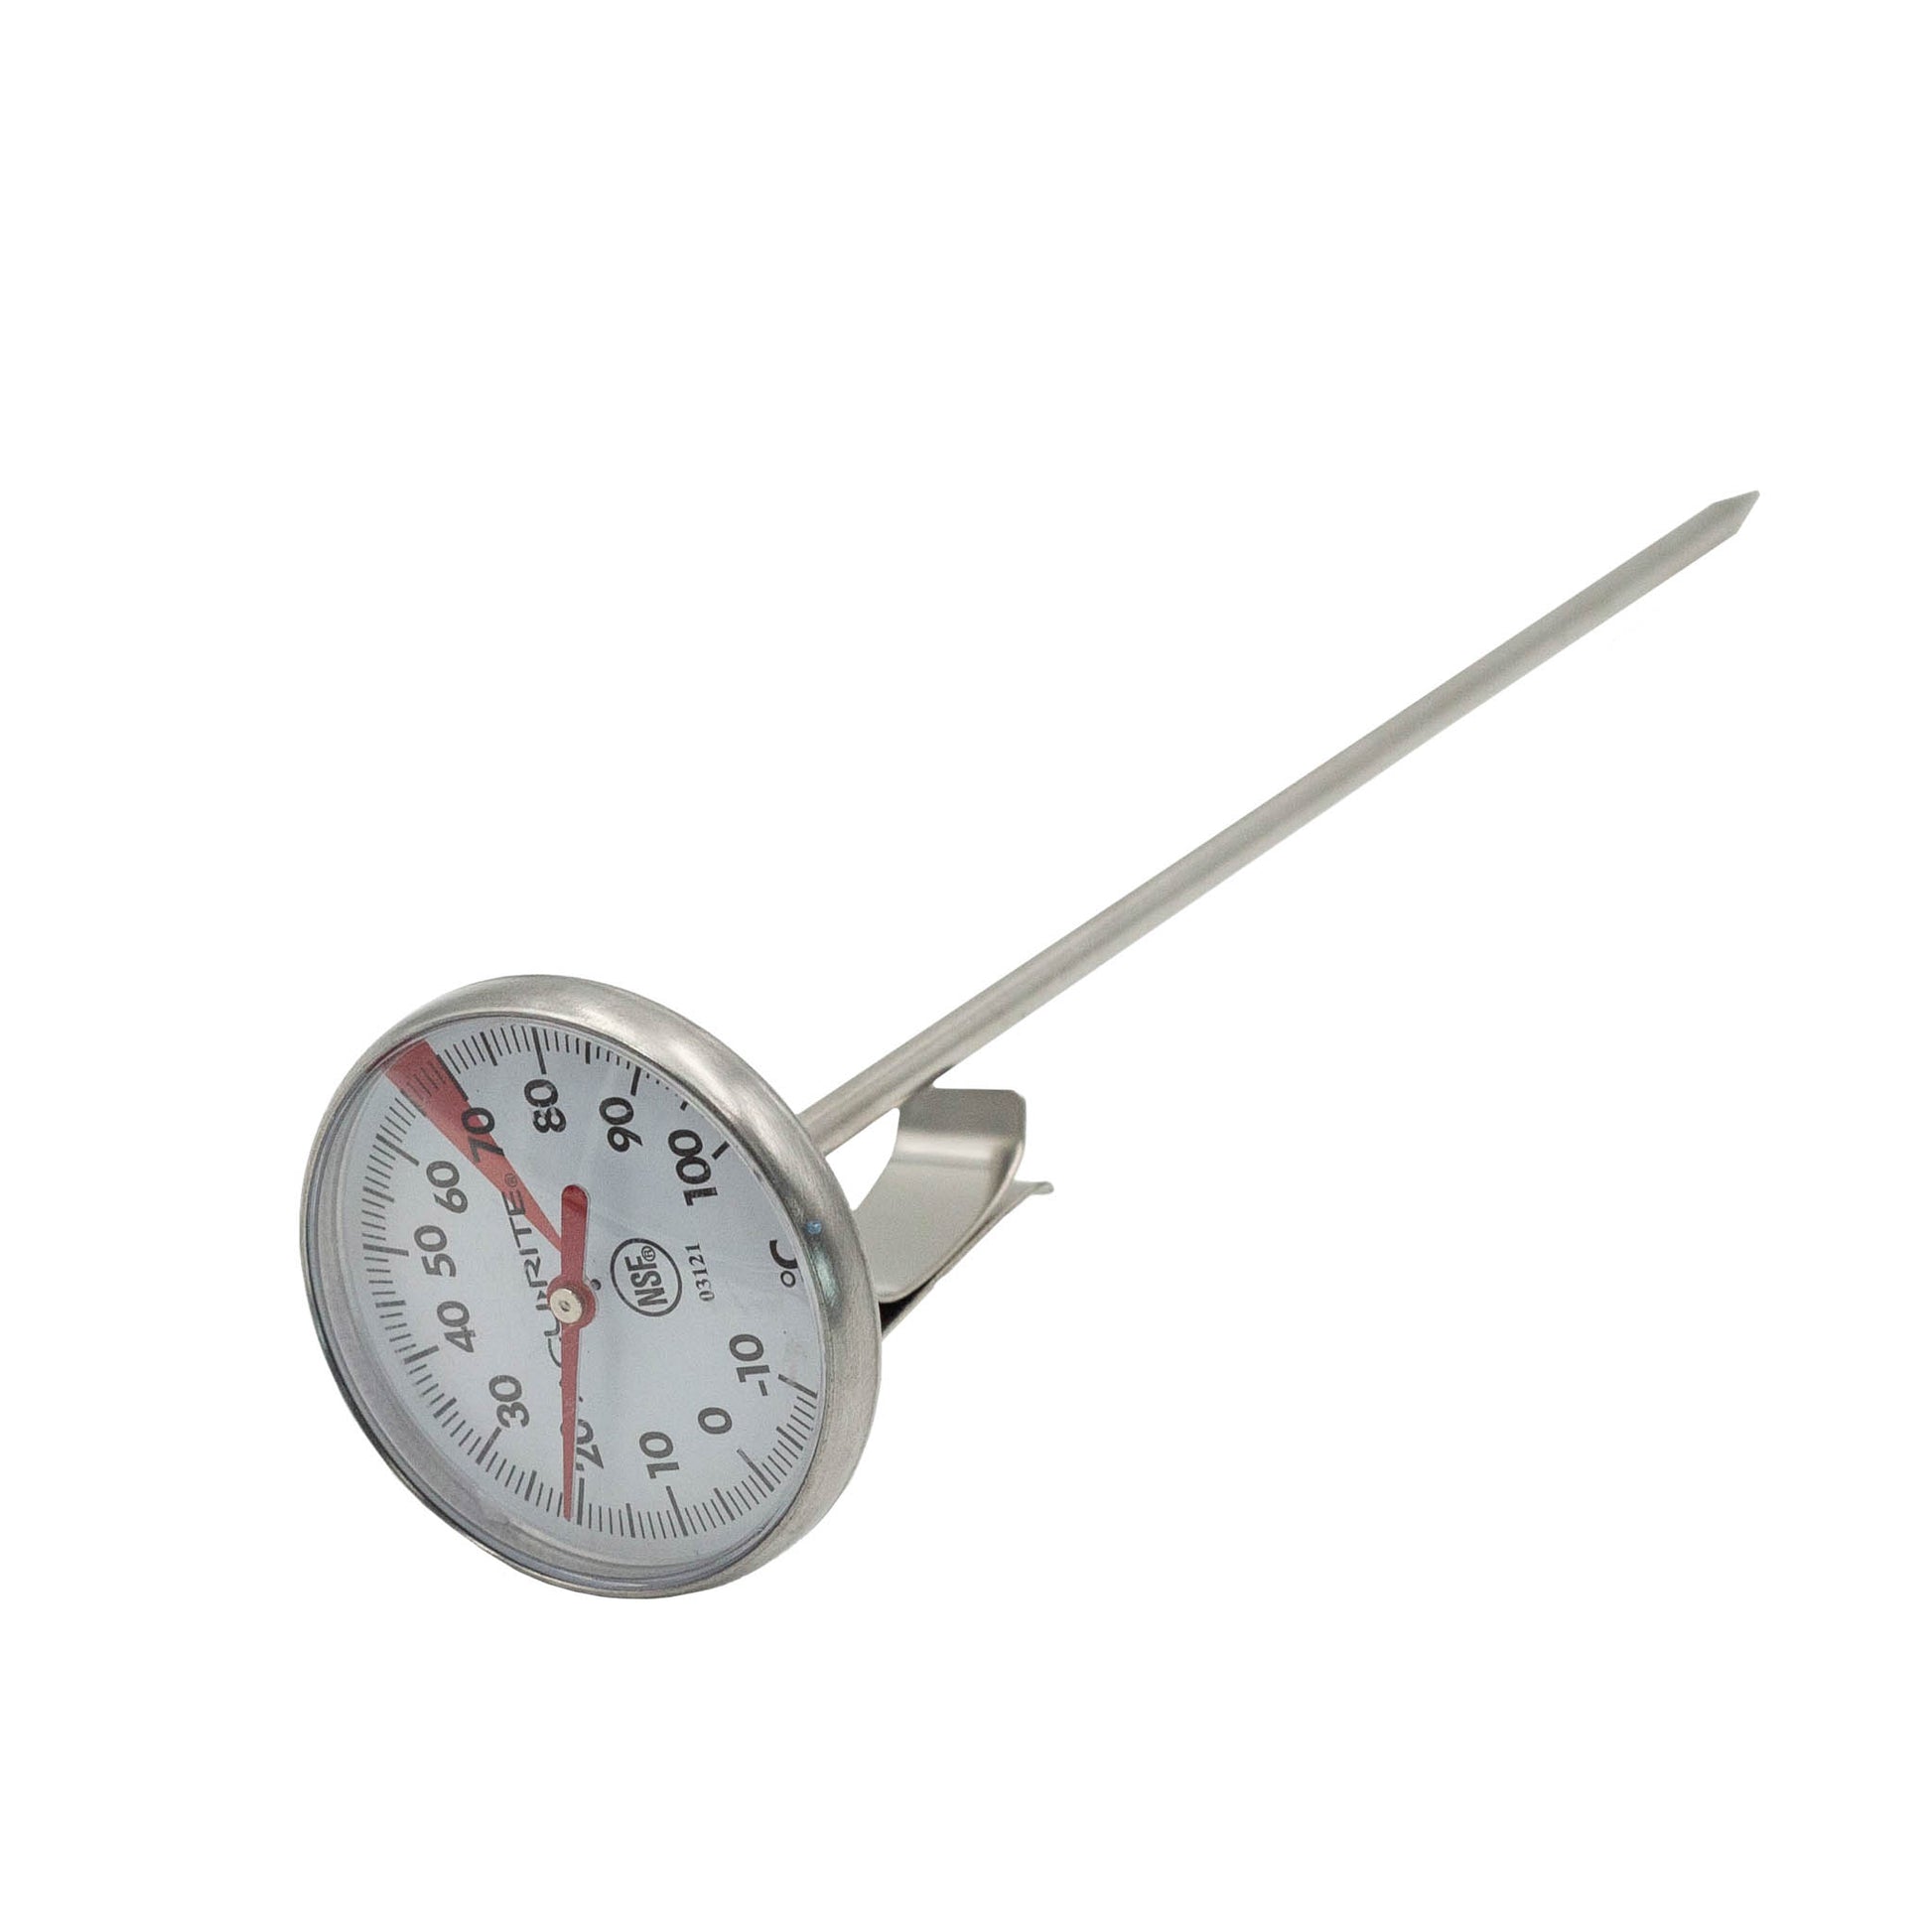 Cheese-making thermometer